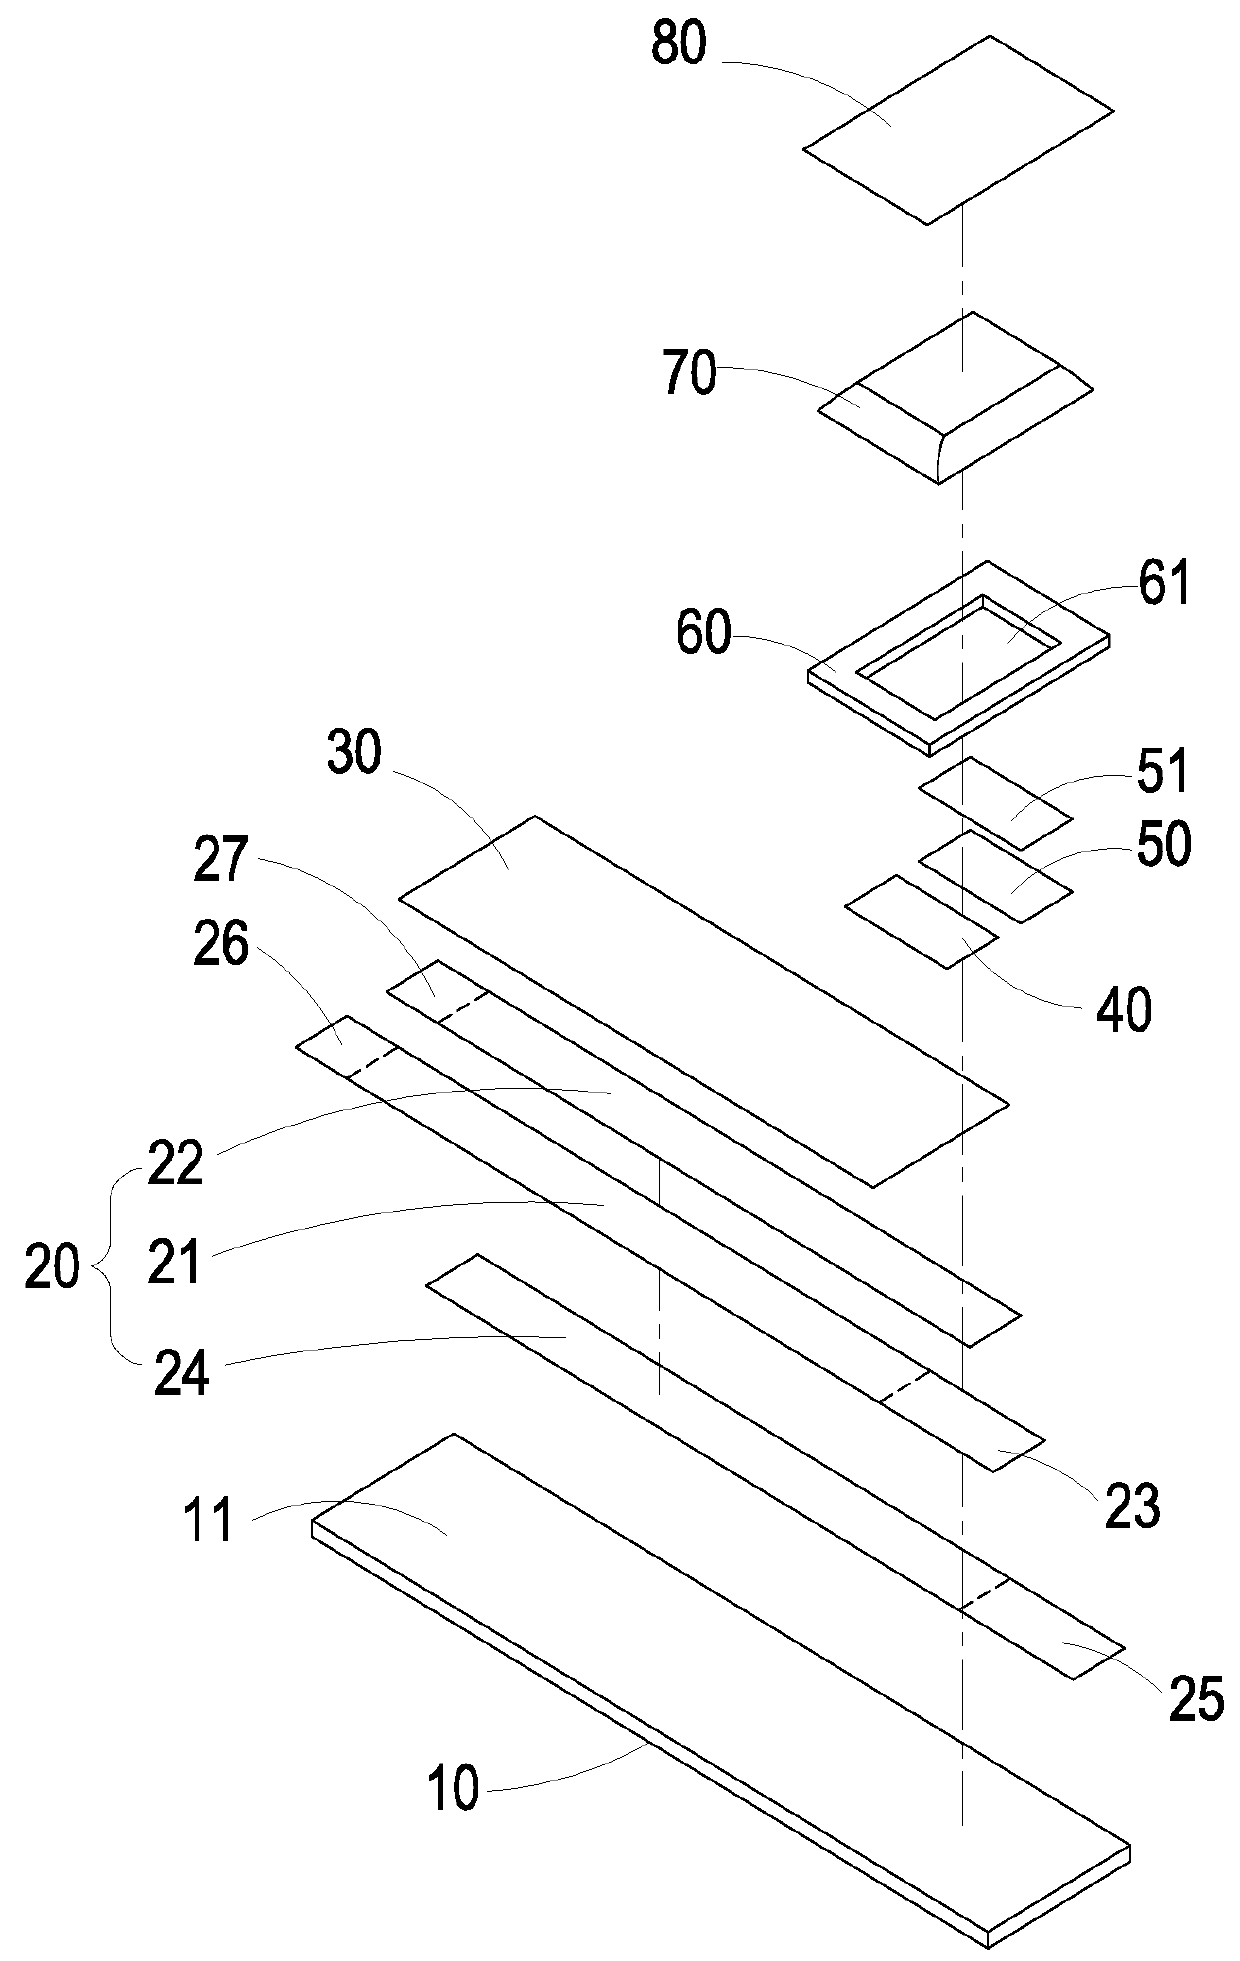 Planar dissolved oxygen sensing electrode and manufacturing method thereof